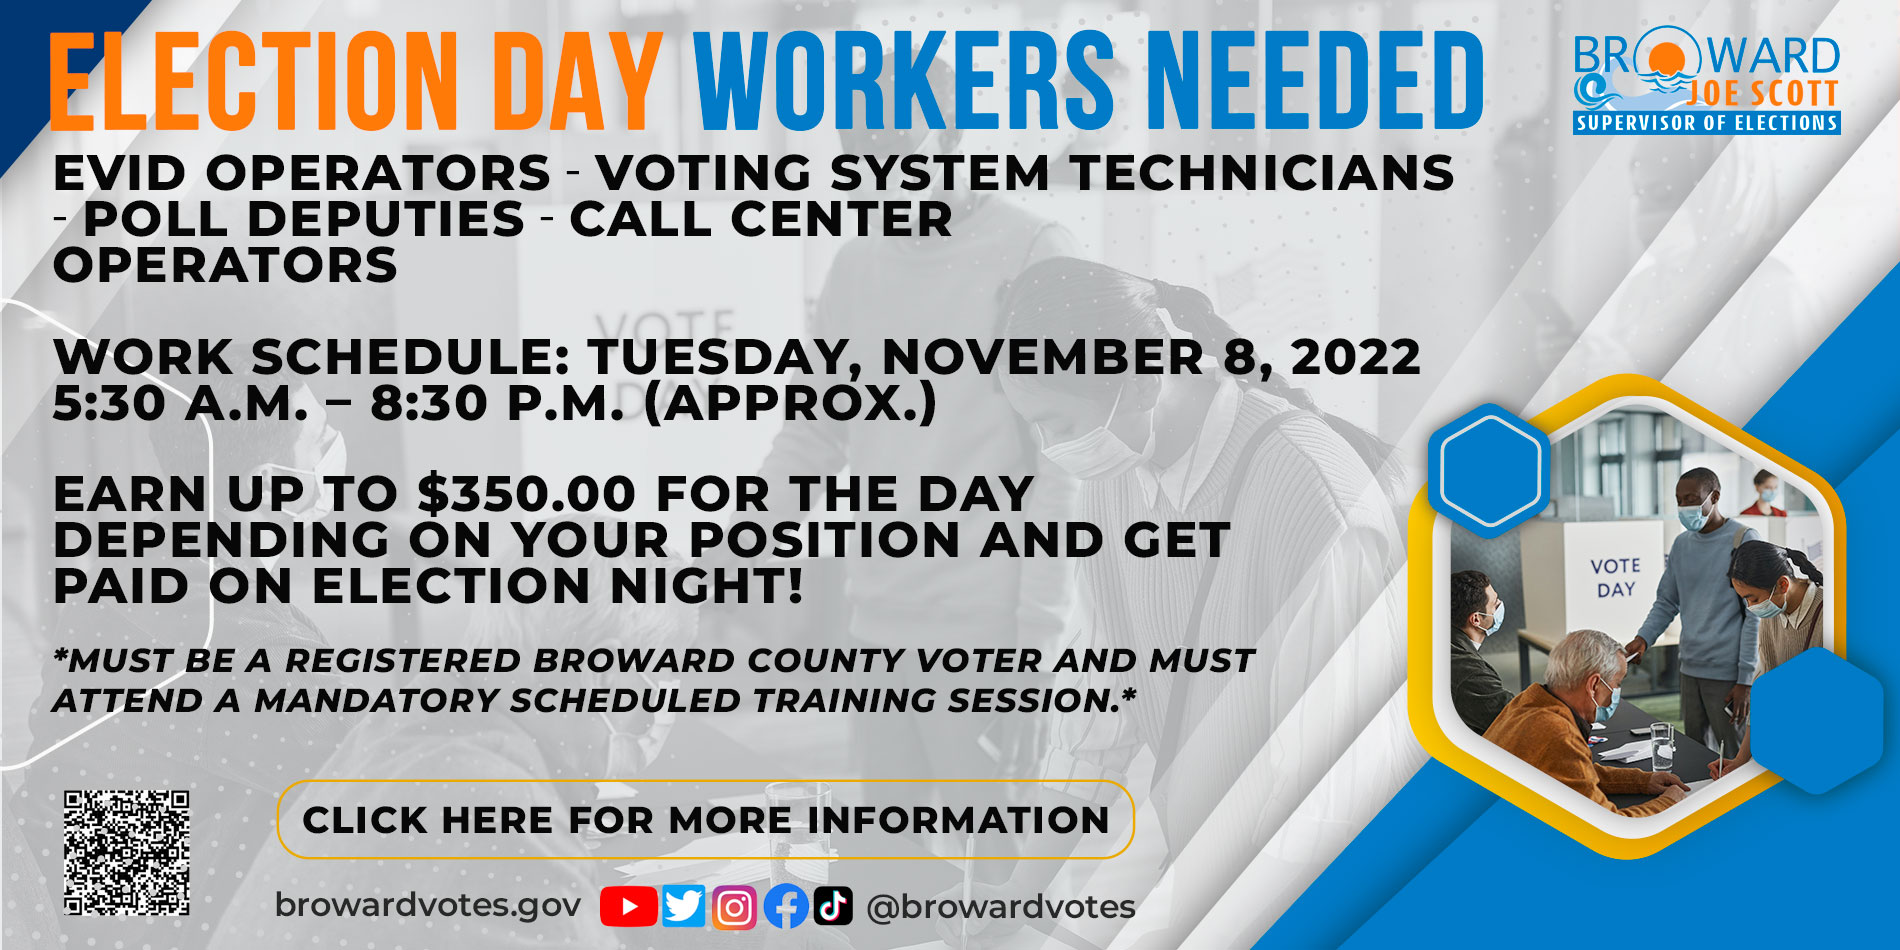 Become an Election Day Worker